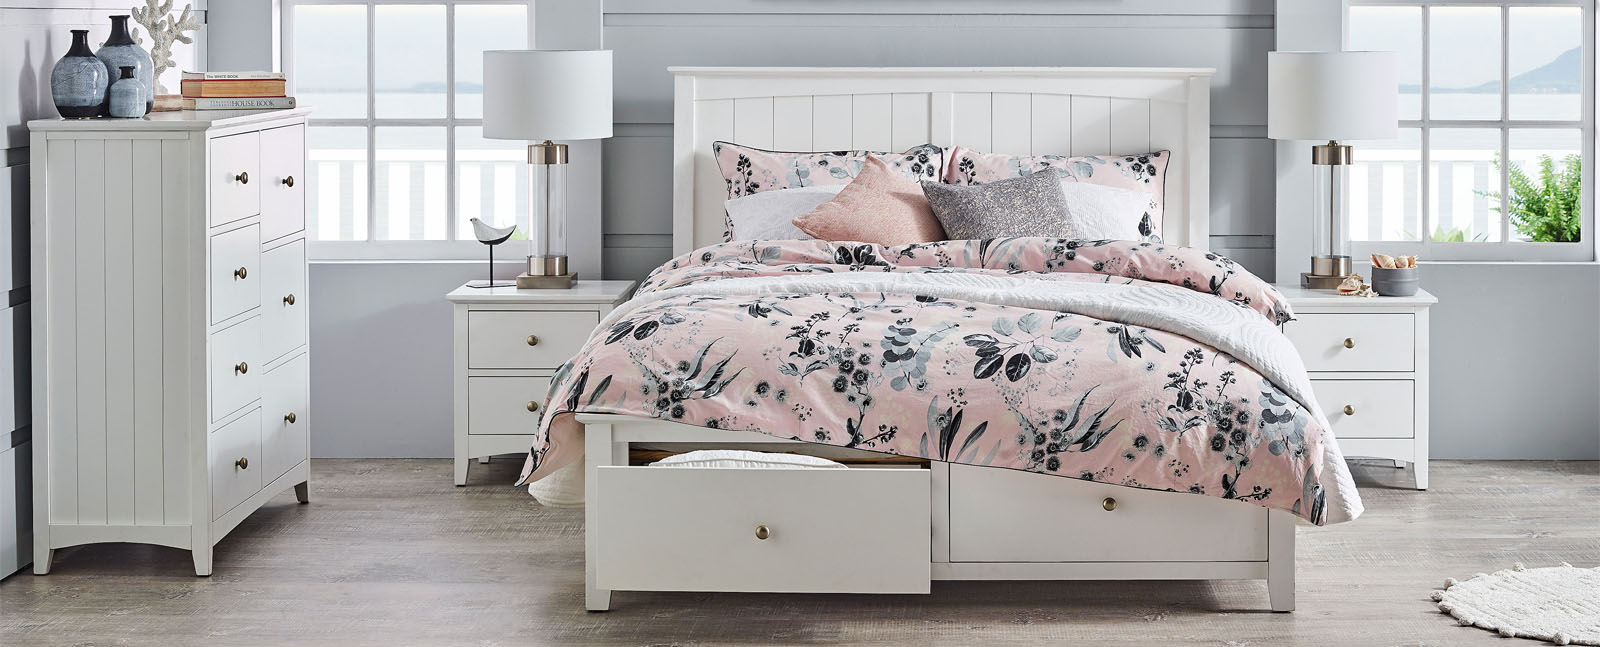 Top 5 Autumnwinter Looks For Your Bedroom Harvey Norman Australia with size 1600 X 647